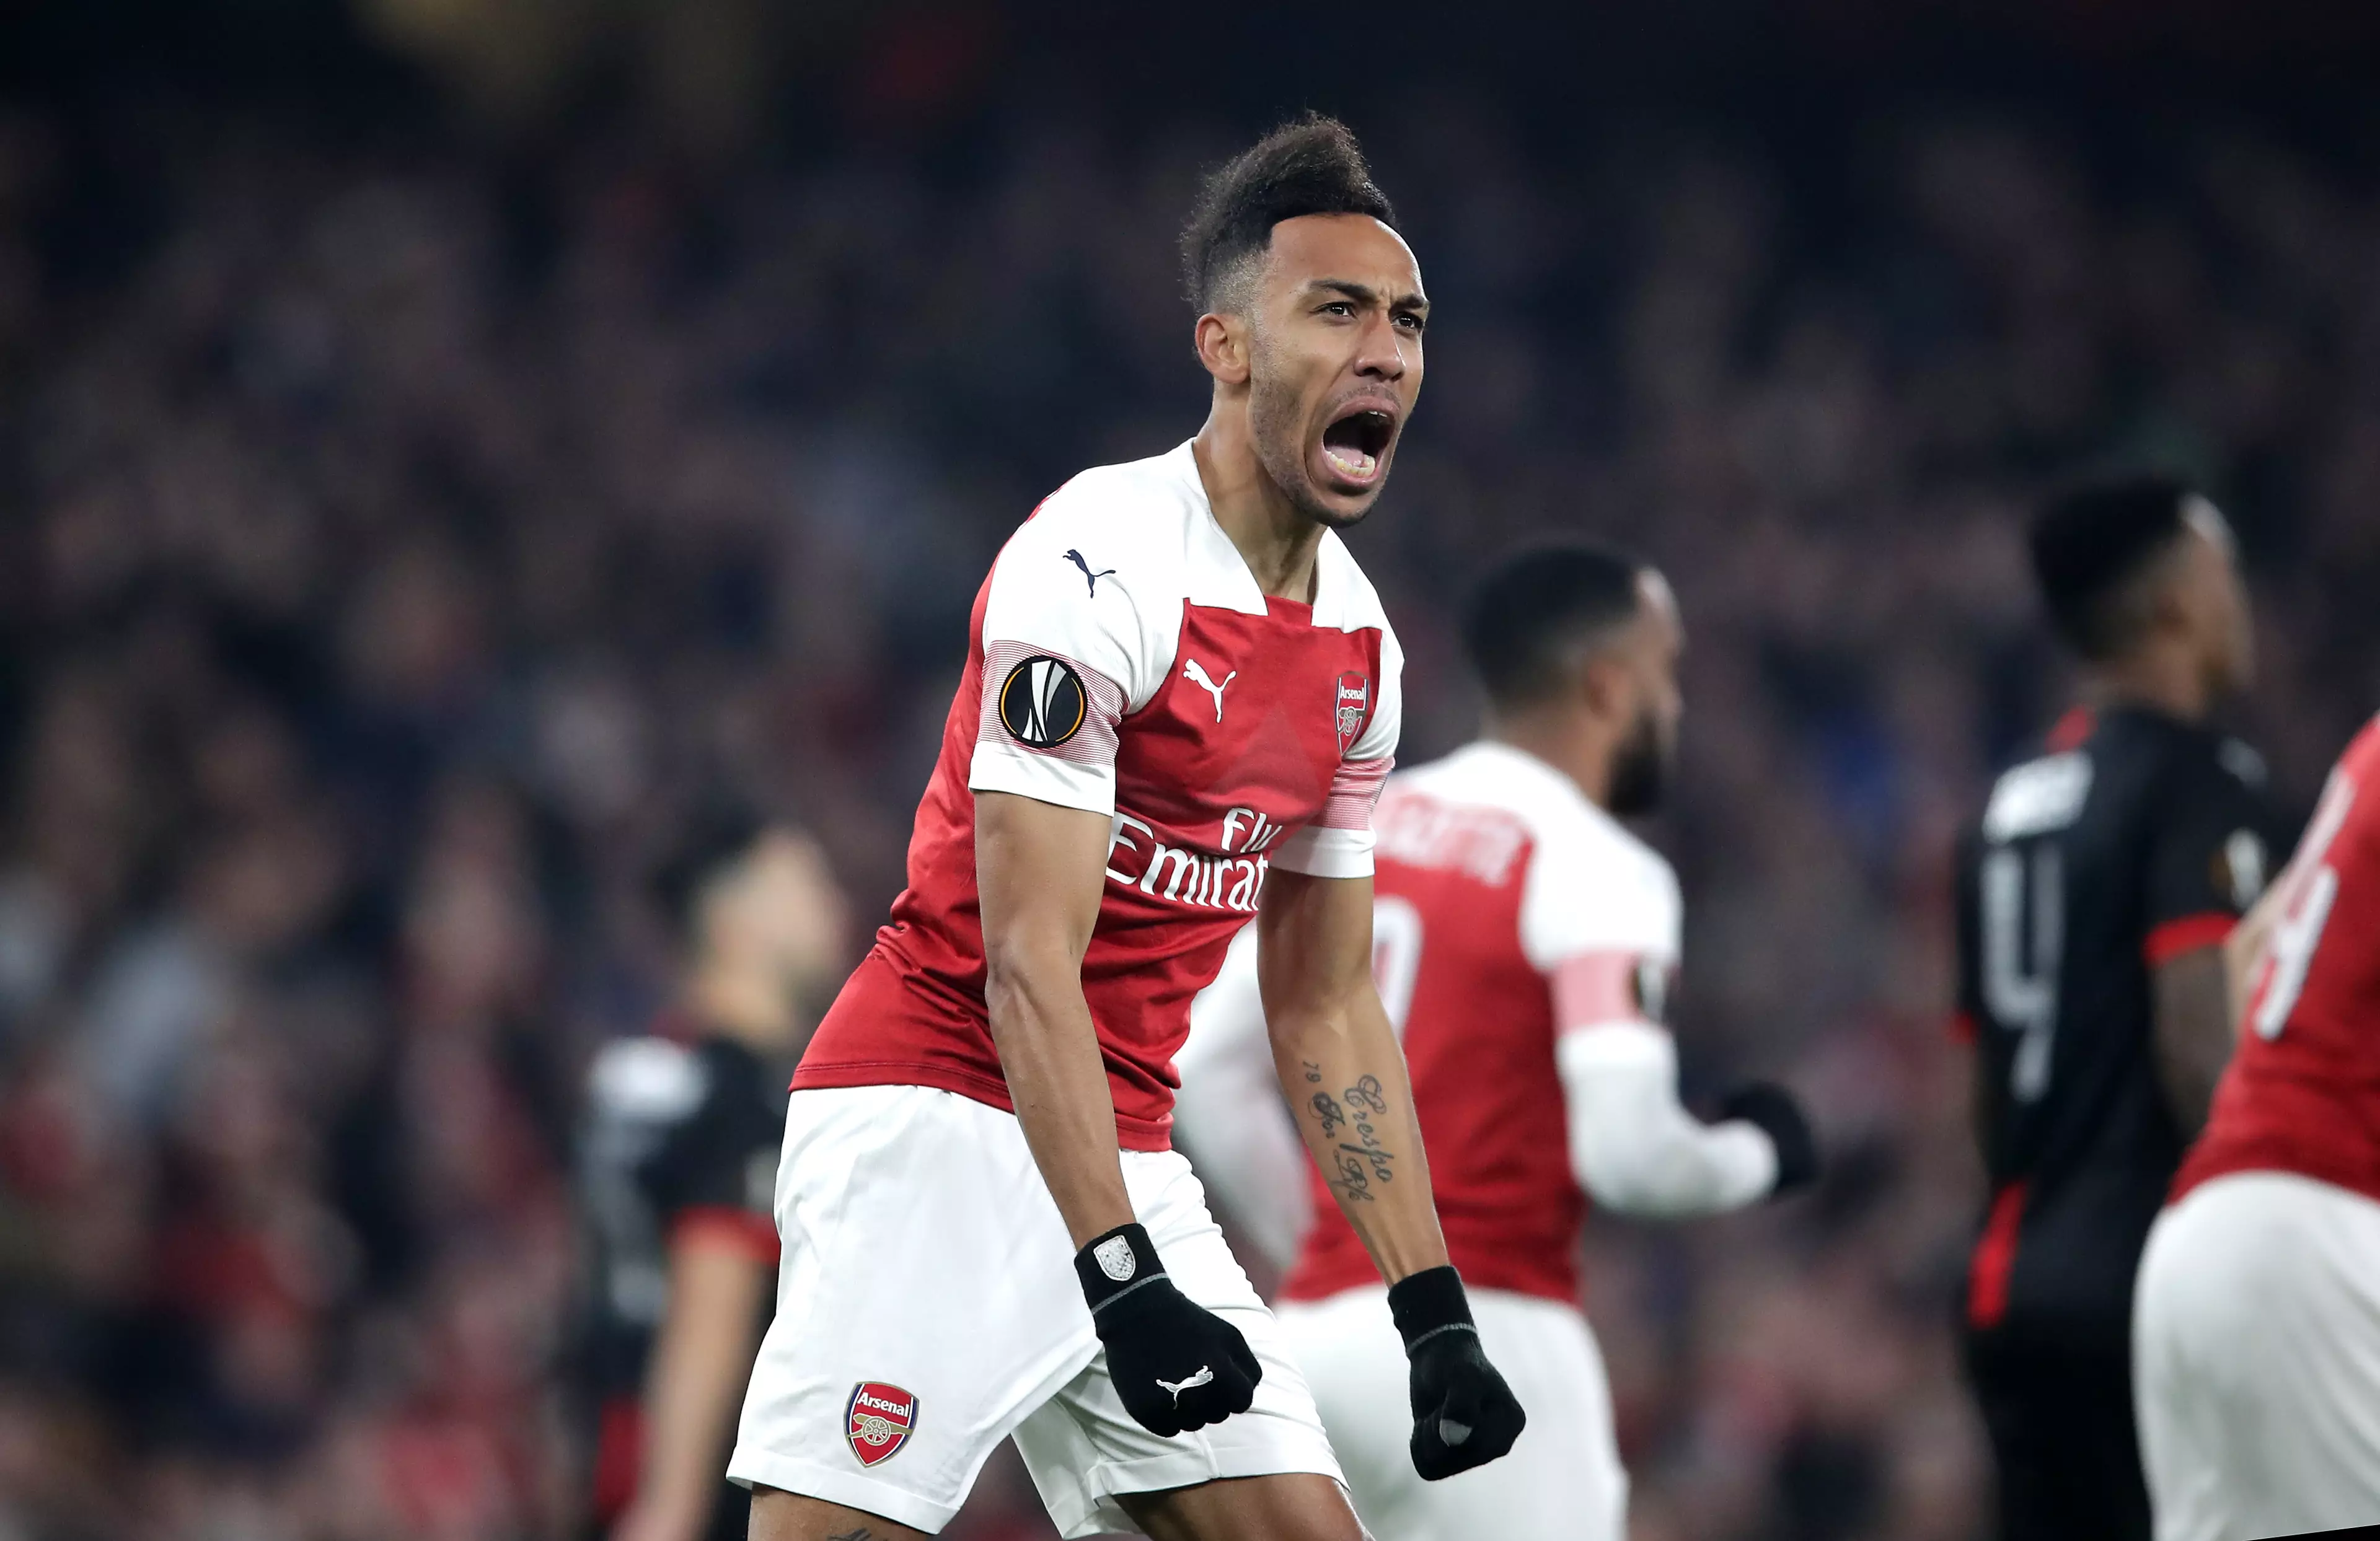 Aubameyang has been brilliant for Arsenal since his move. Image: PA Images